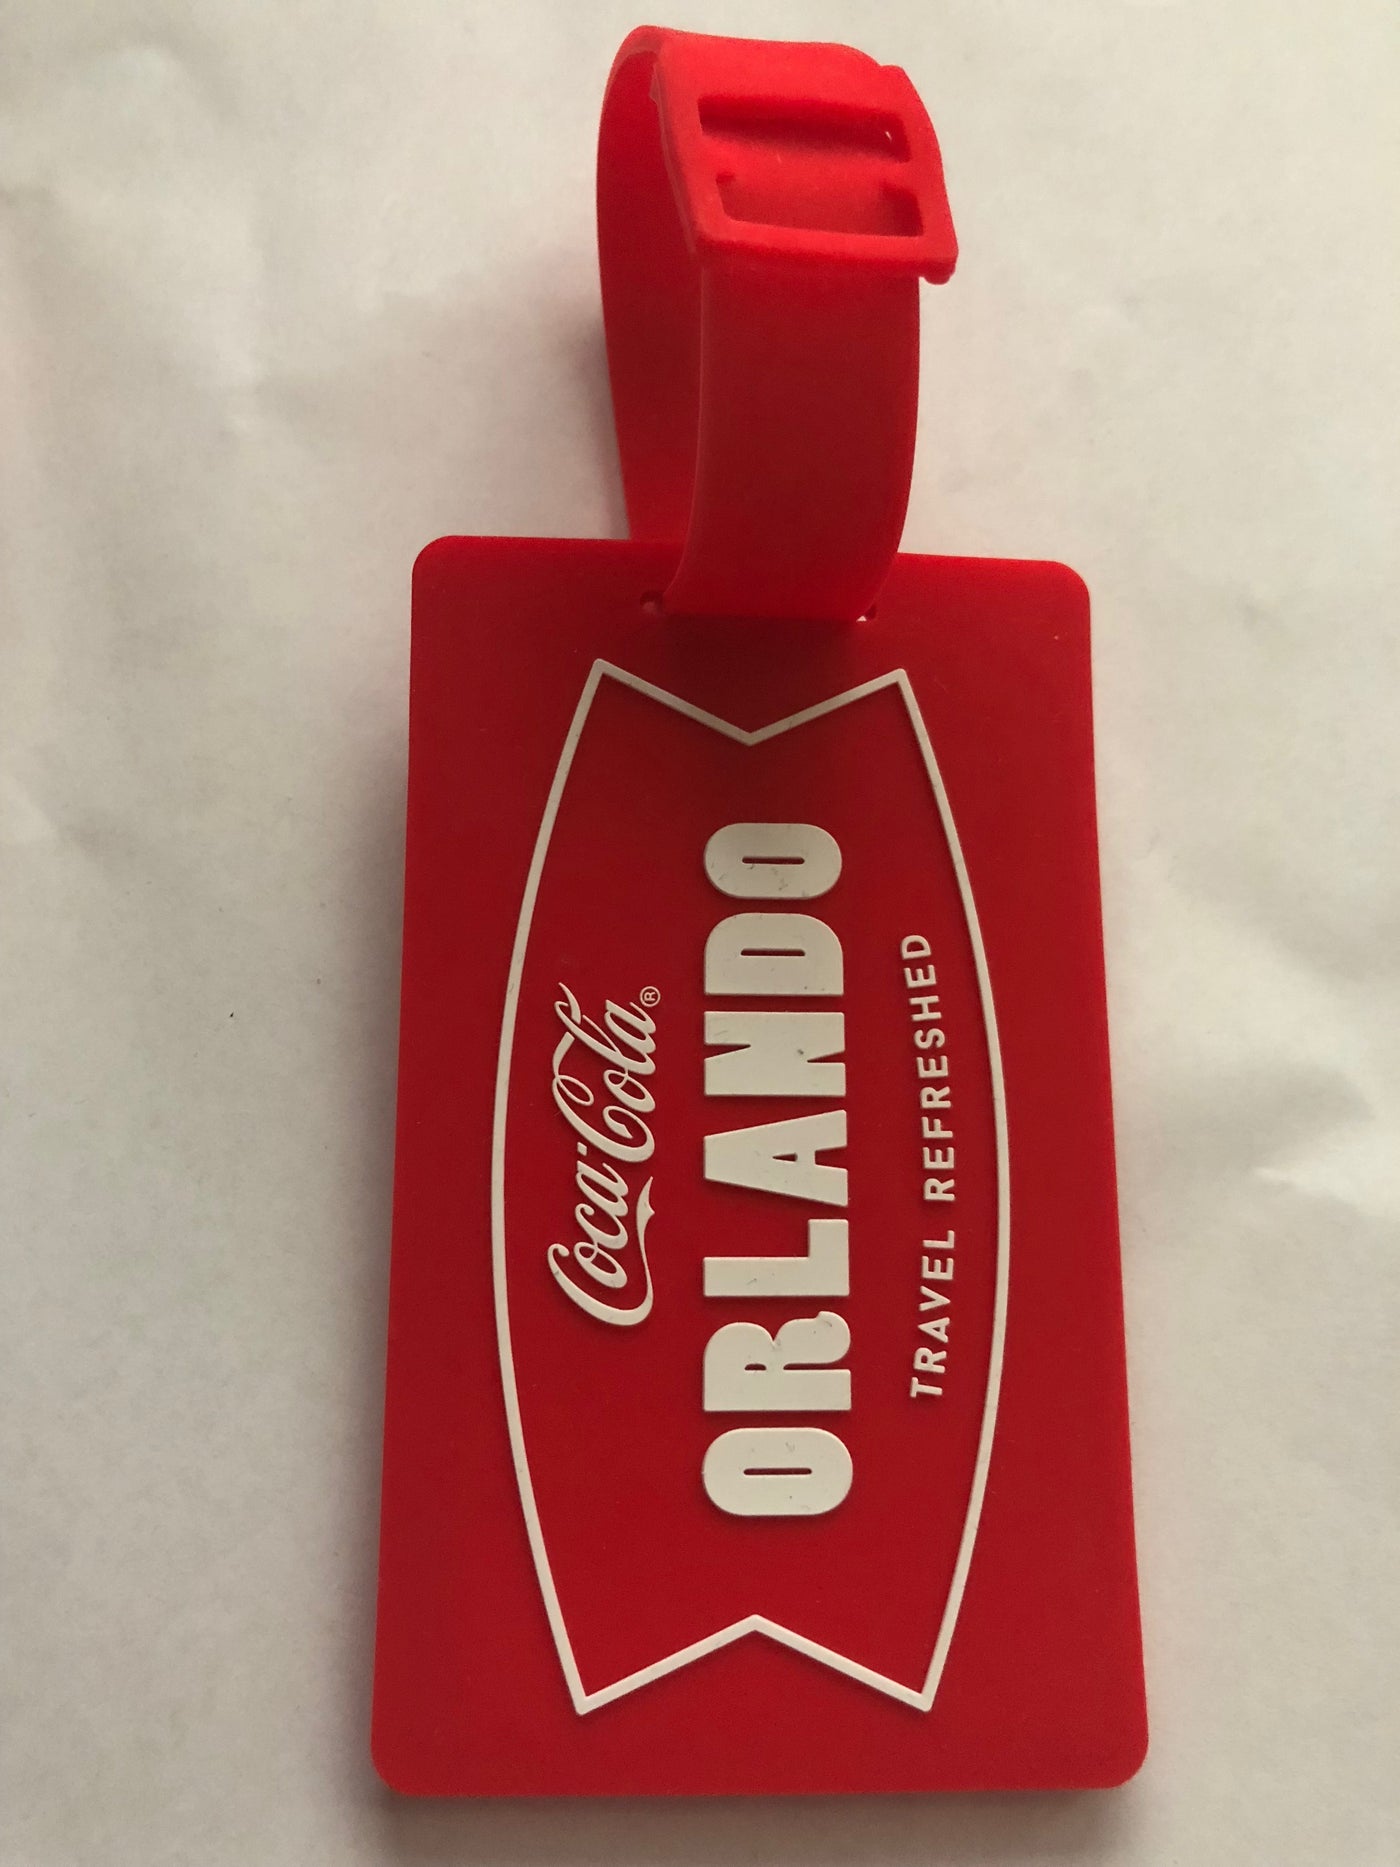 Authentic Coca Cola Coke Orlando Travel Refreshed Red Luggage Tag New with Tags